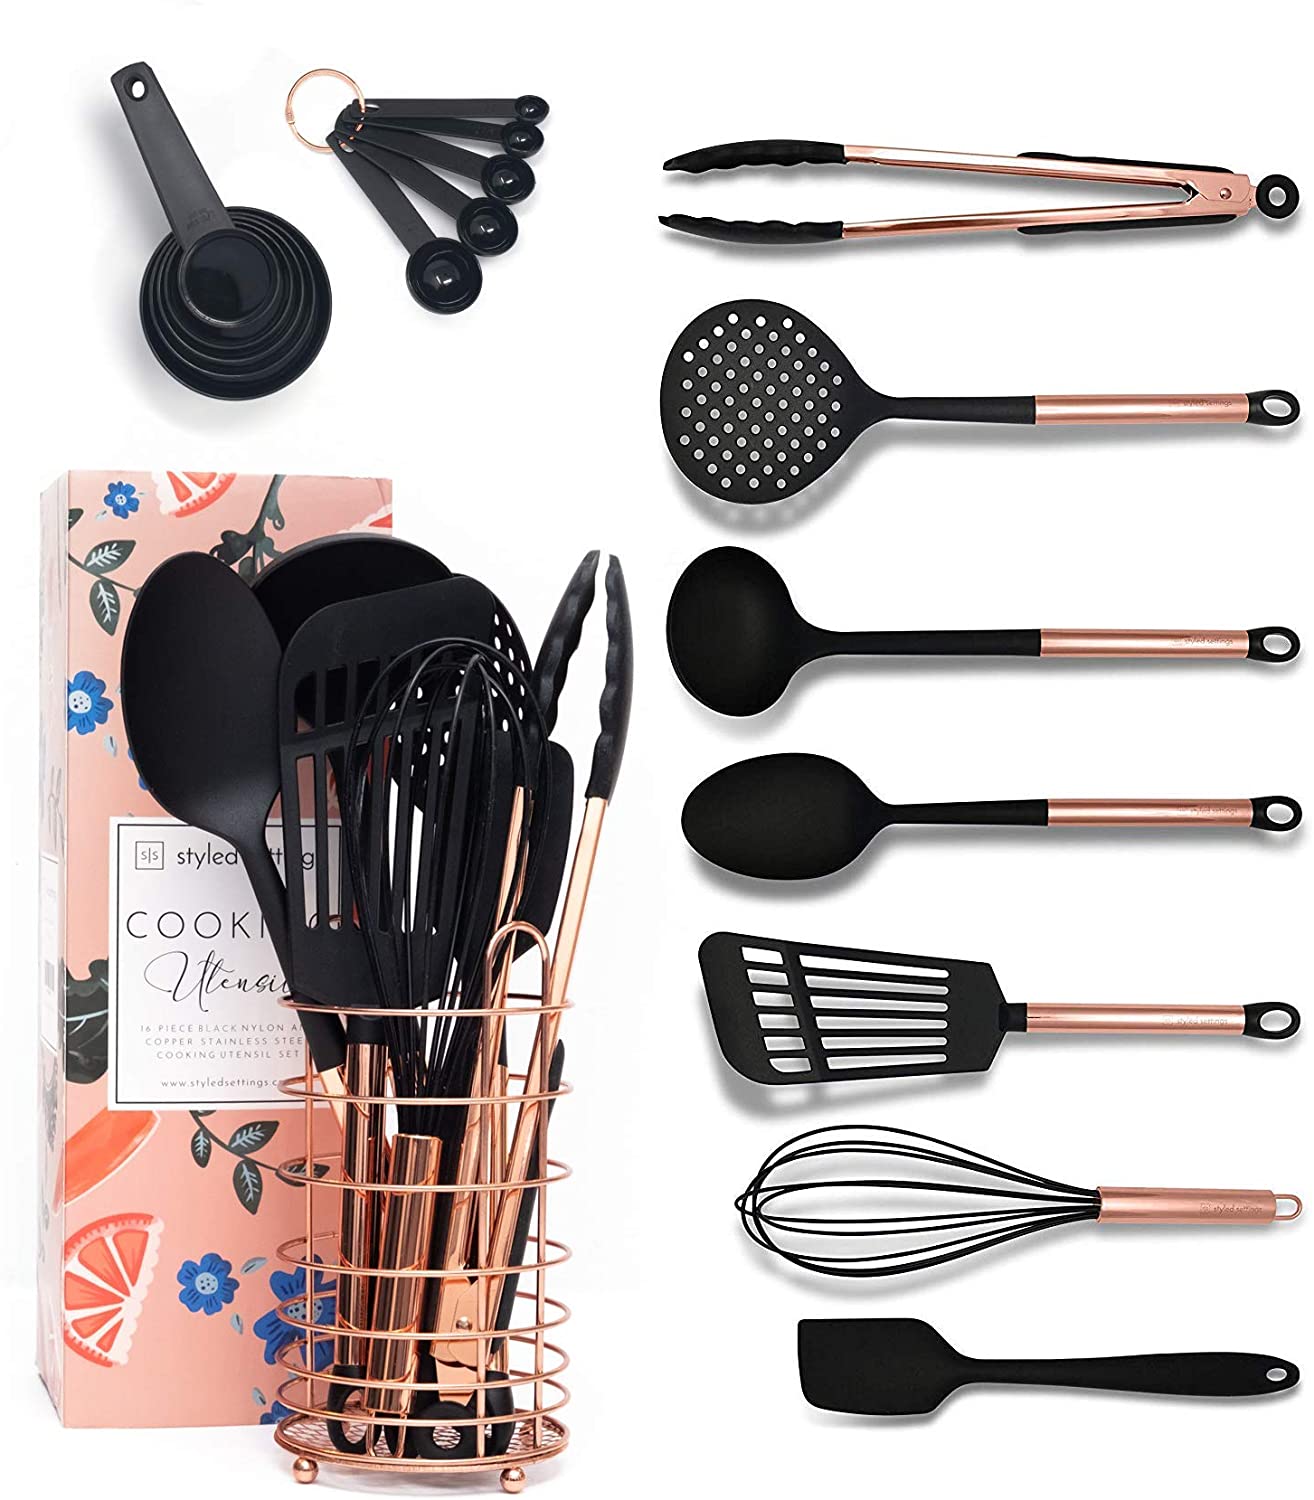 Styled Settings Copper and Pink Kitchen Utensils -17PC Pink Cooking Utensils Set with Holder, Includes Pink Measuring Cups and Spoons Set, Copper